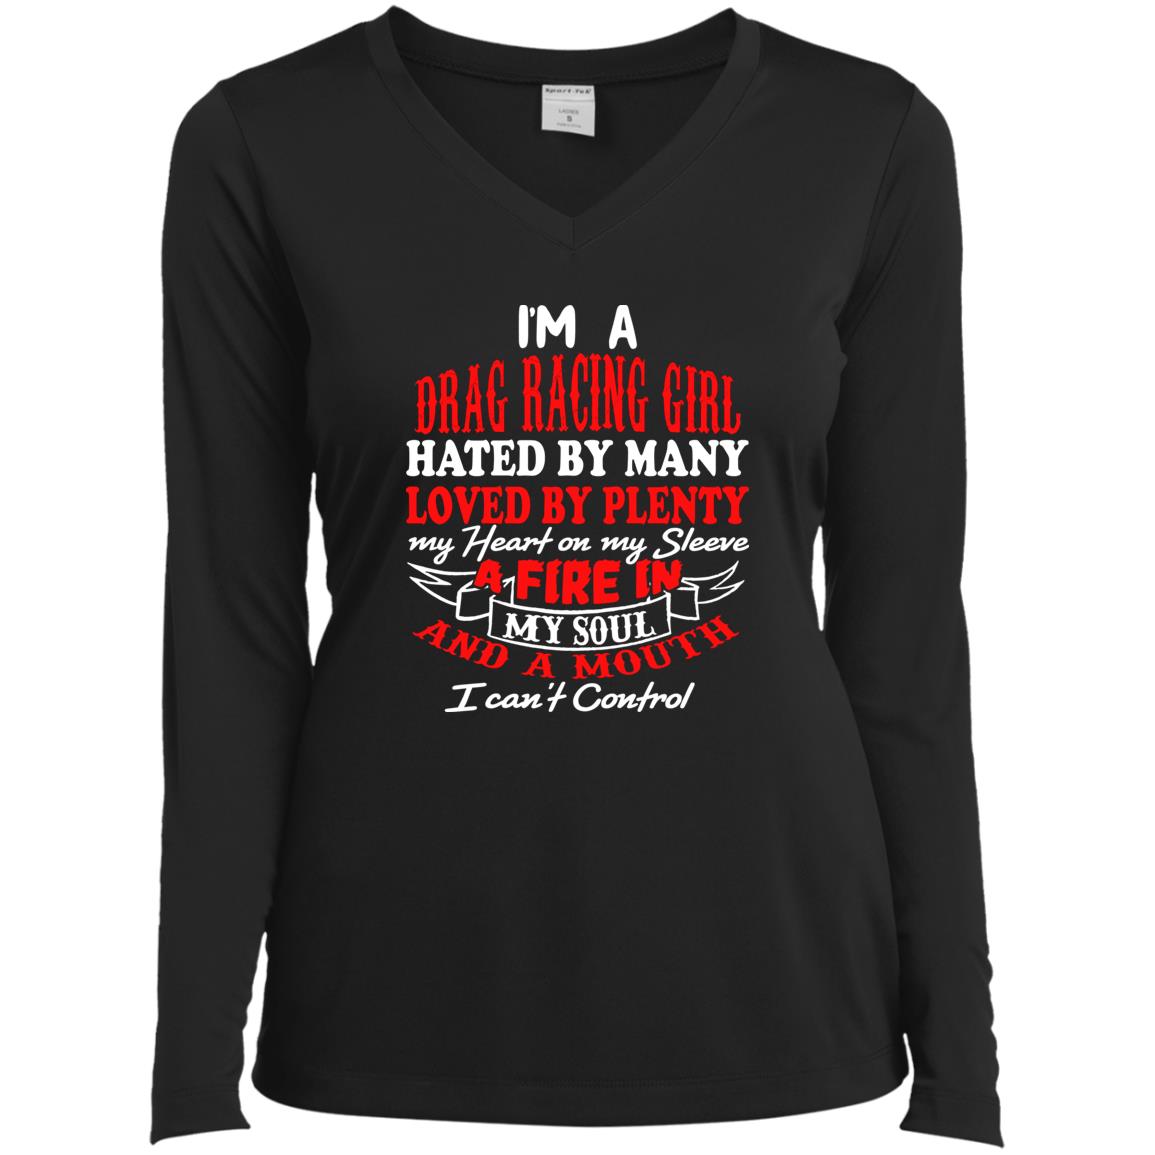 I'm A Drag Racing Girl Hated By Many Loved By Plenty Ladies’ Long Sleeve Performance V-Neck Tee